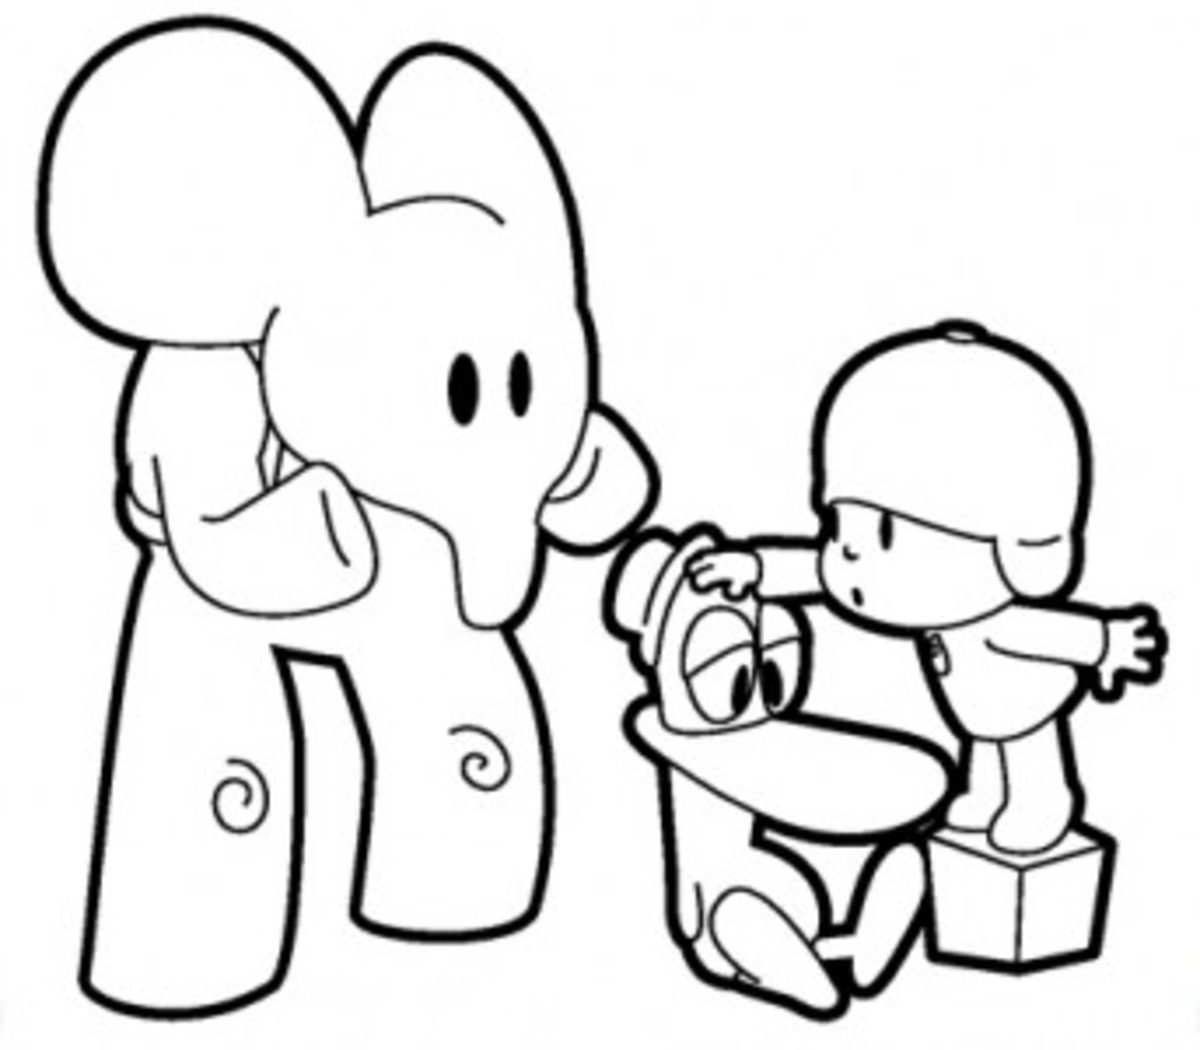 Having Fun with Free Pocoyo Coloring Pages | hubpages